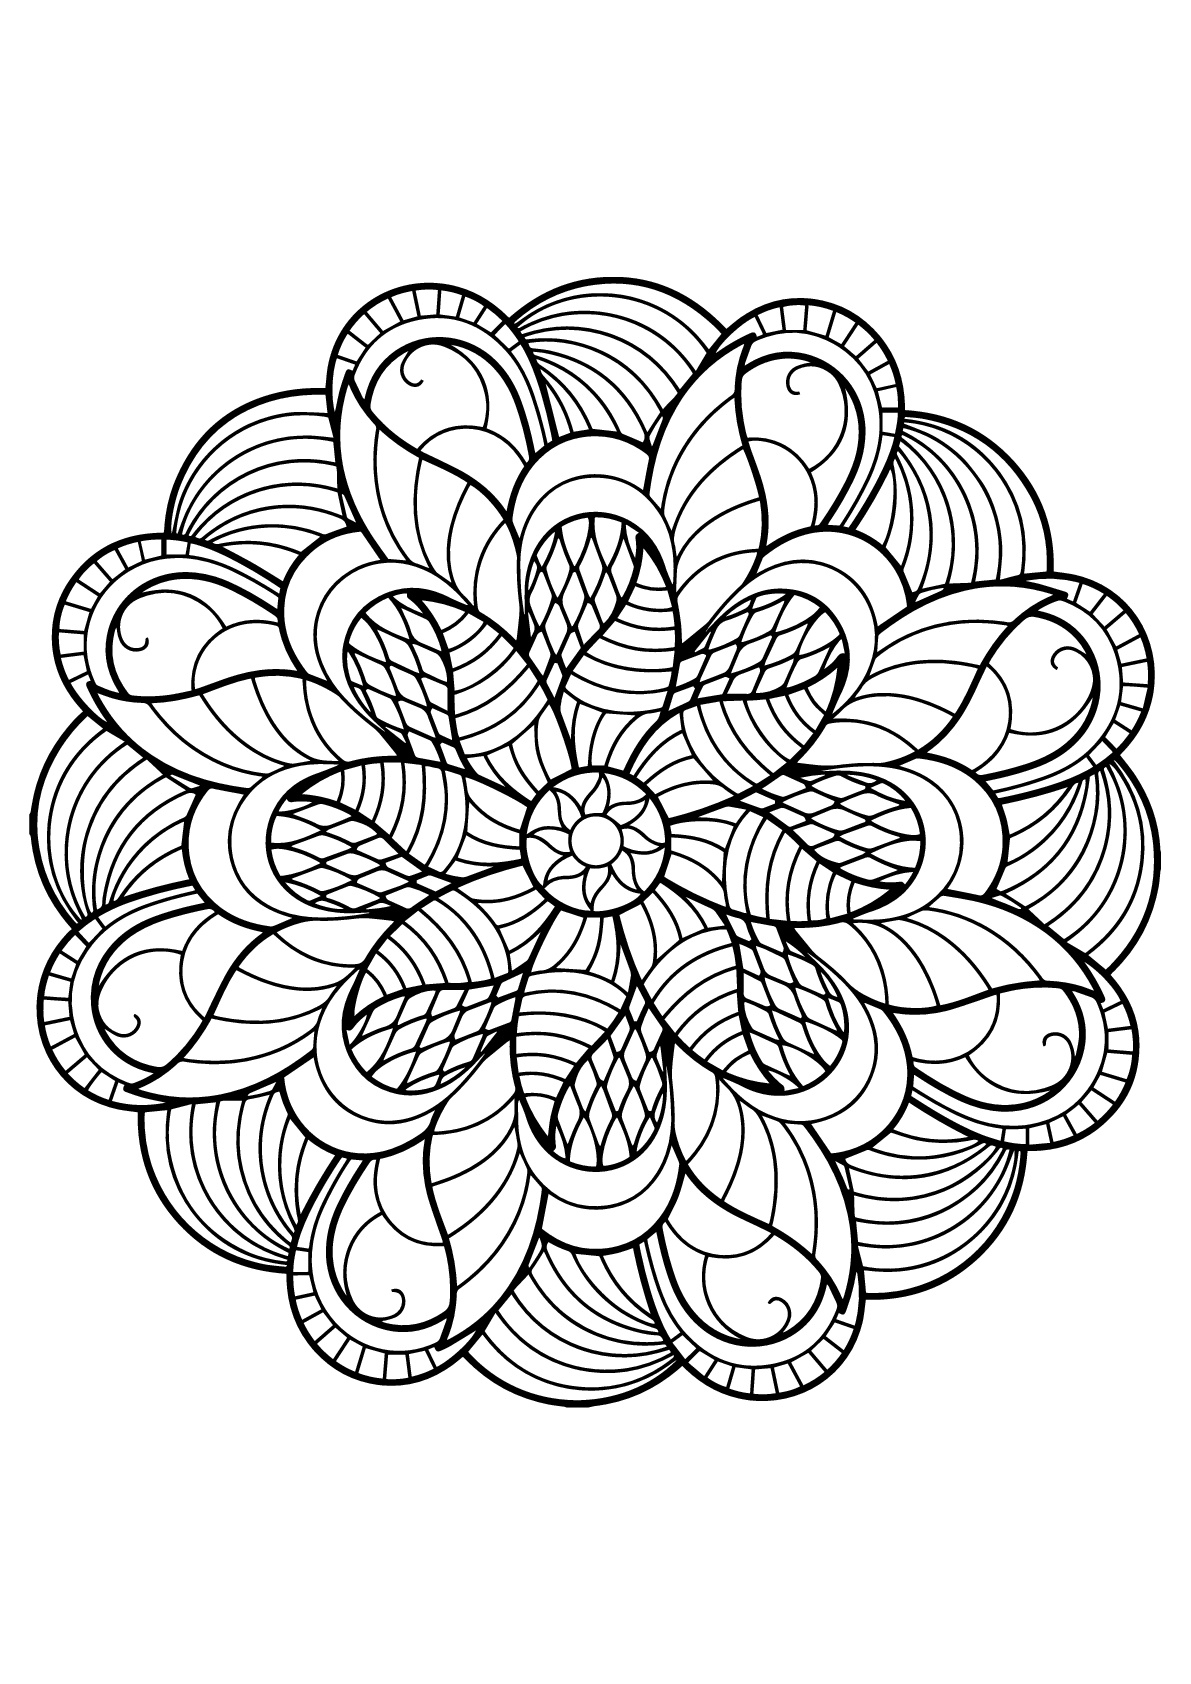 Mandala from free coloring books for adults 6 - Mandalas Adult Coloring  Pages